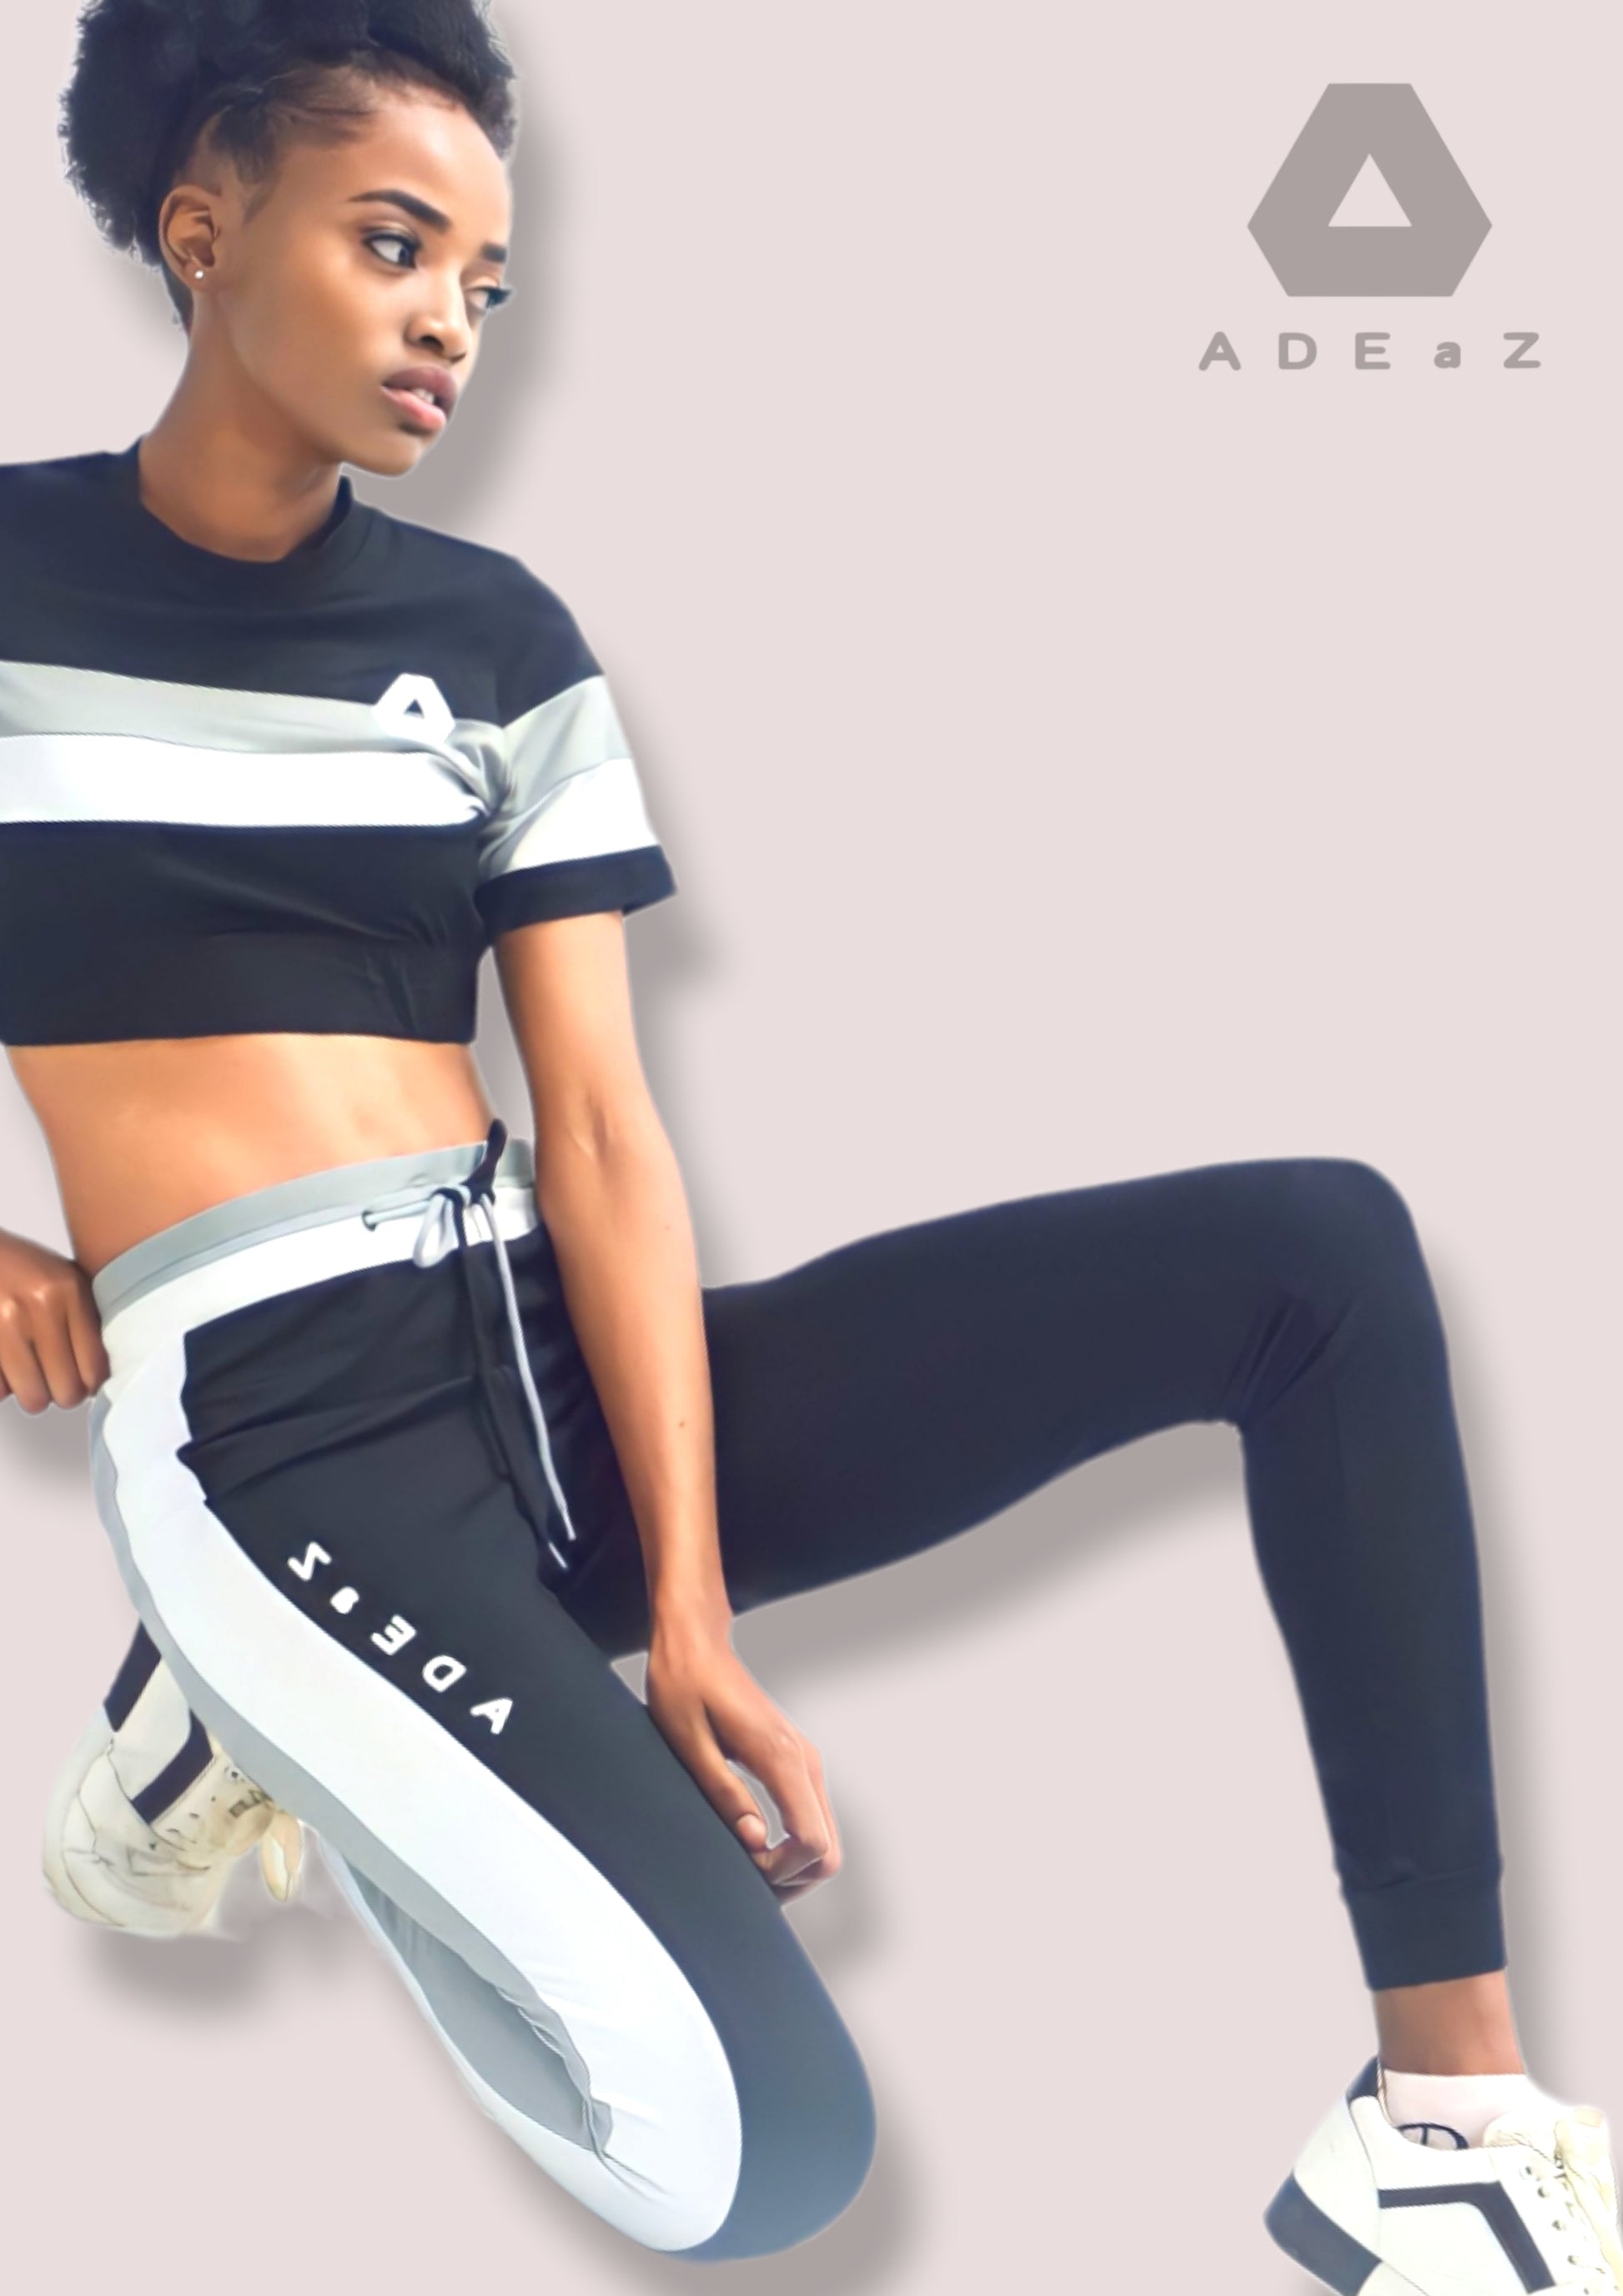 Tapered jogger tights in black, white and charcoal gray, designed for a snug fit and comfortable athletic wear